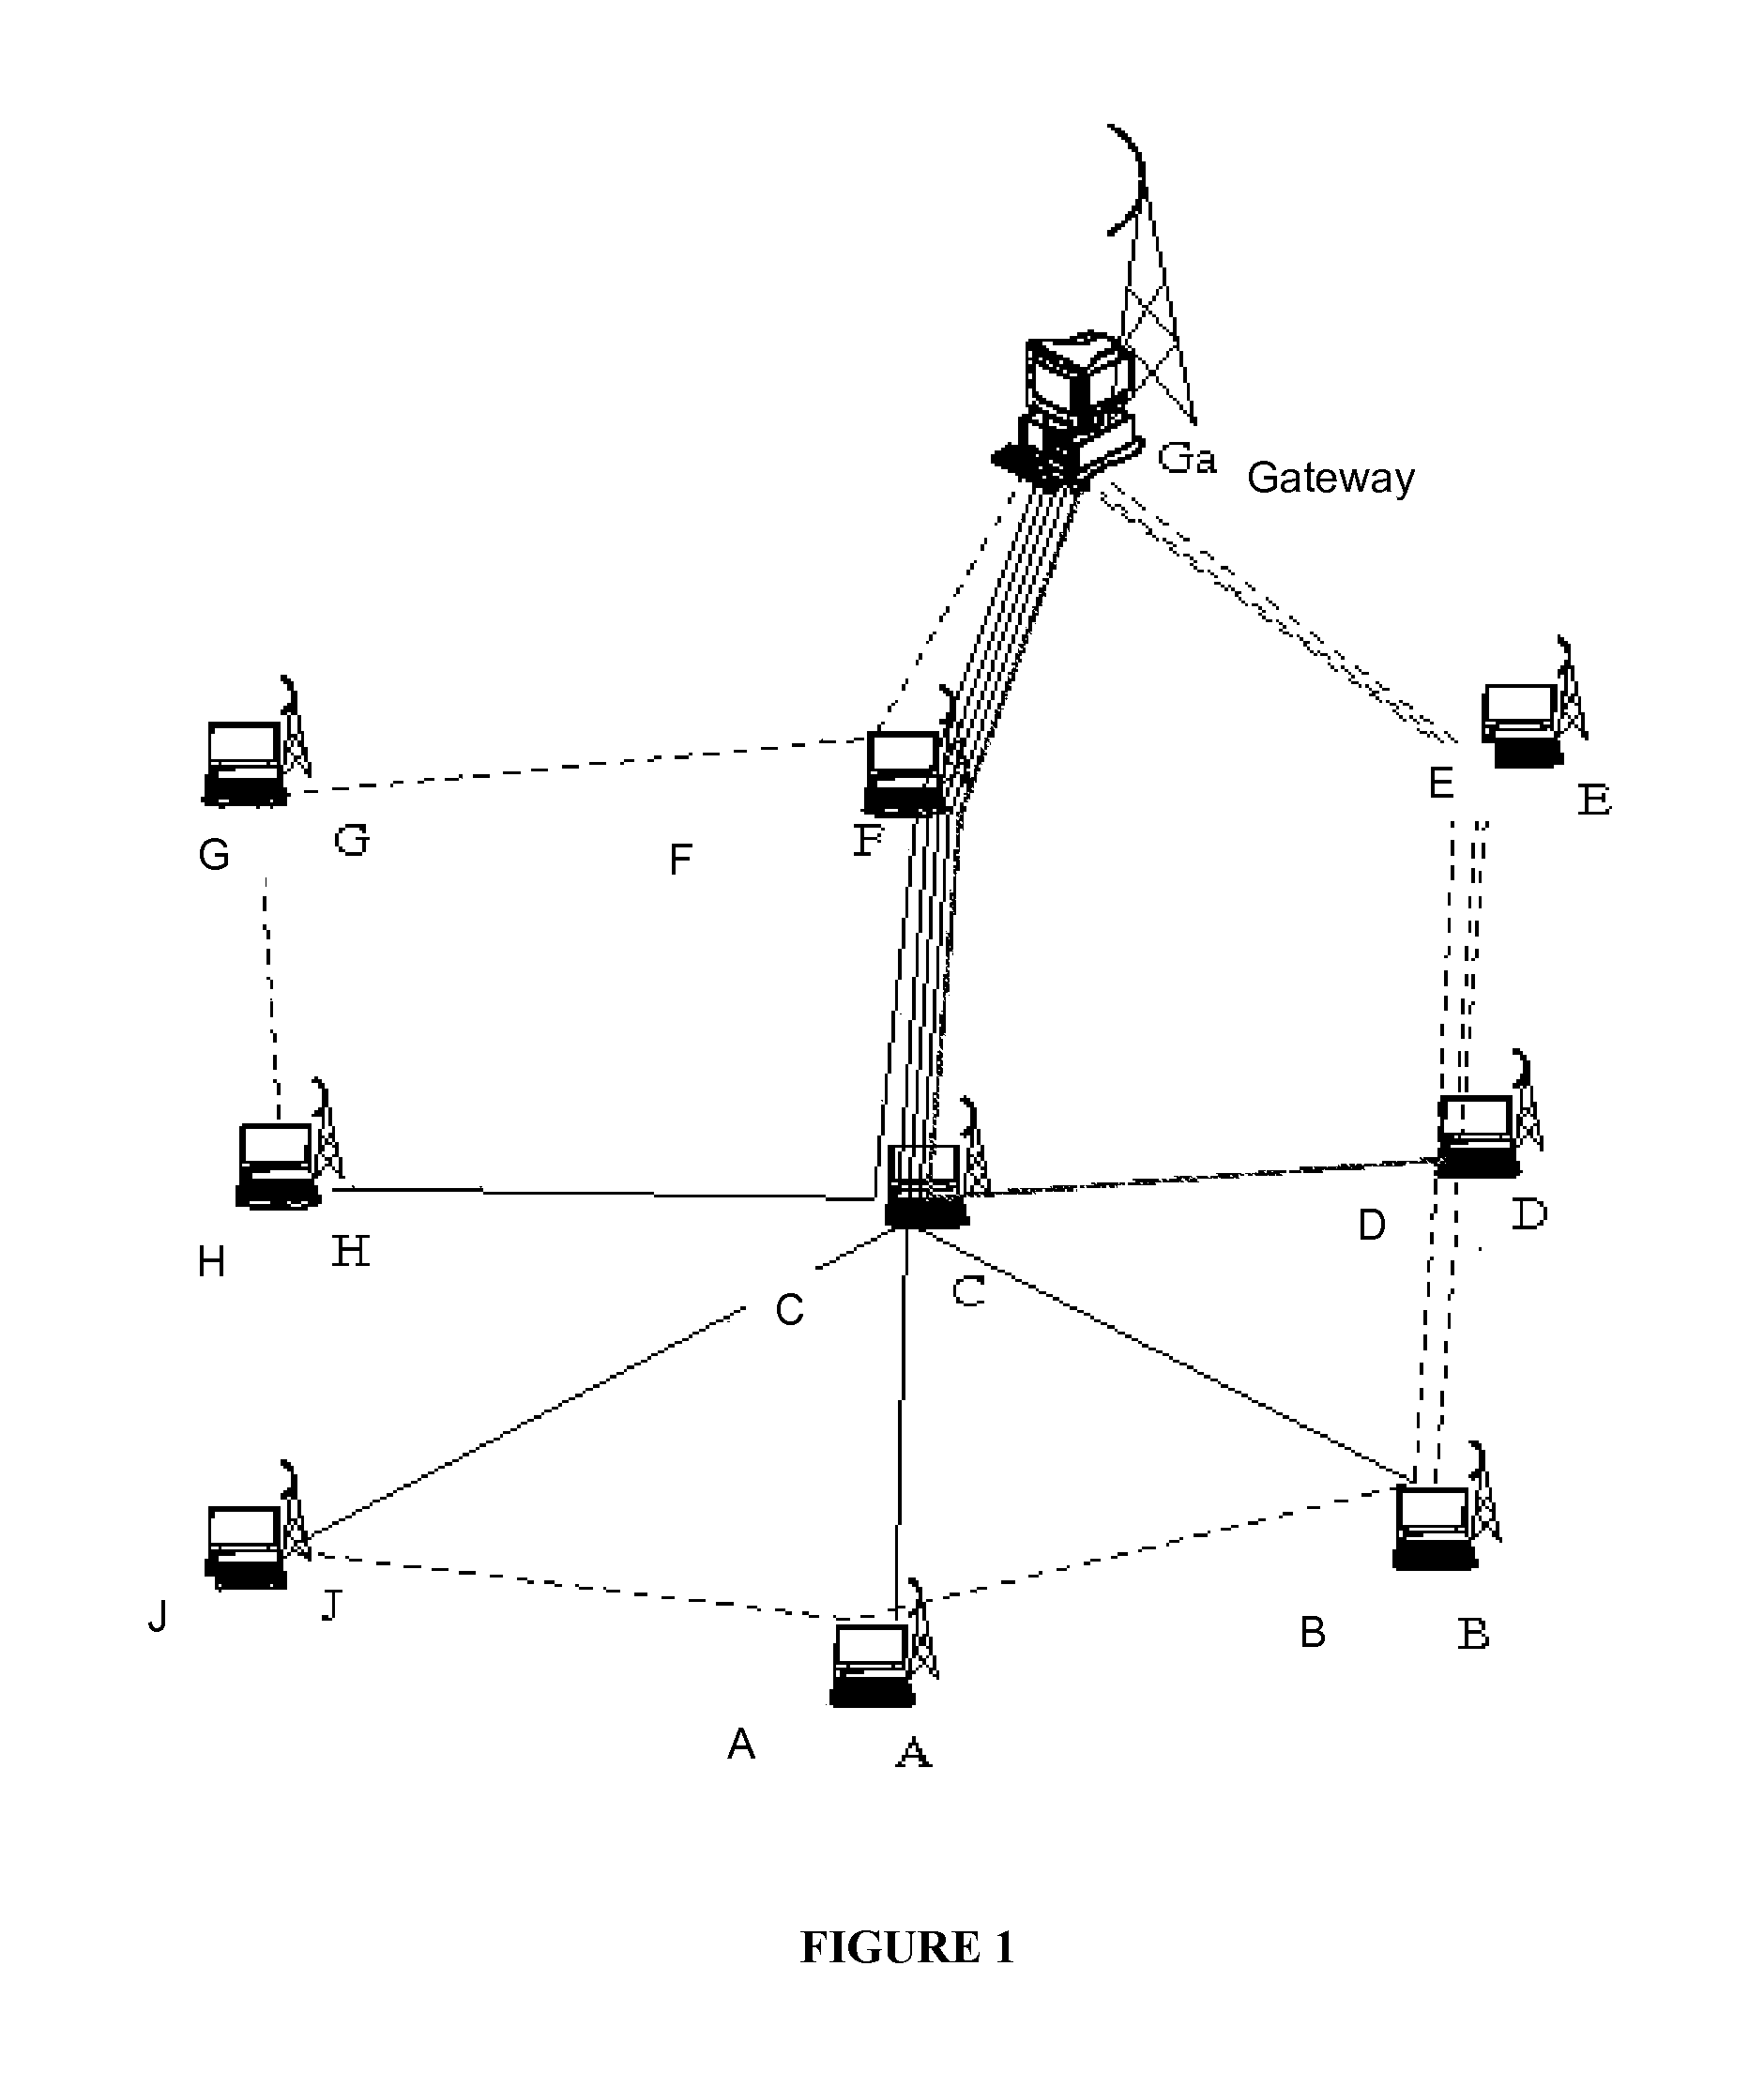 System and method for enhancing lifetime and throughput in a distributed wireless network